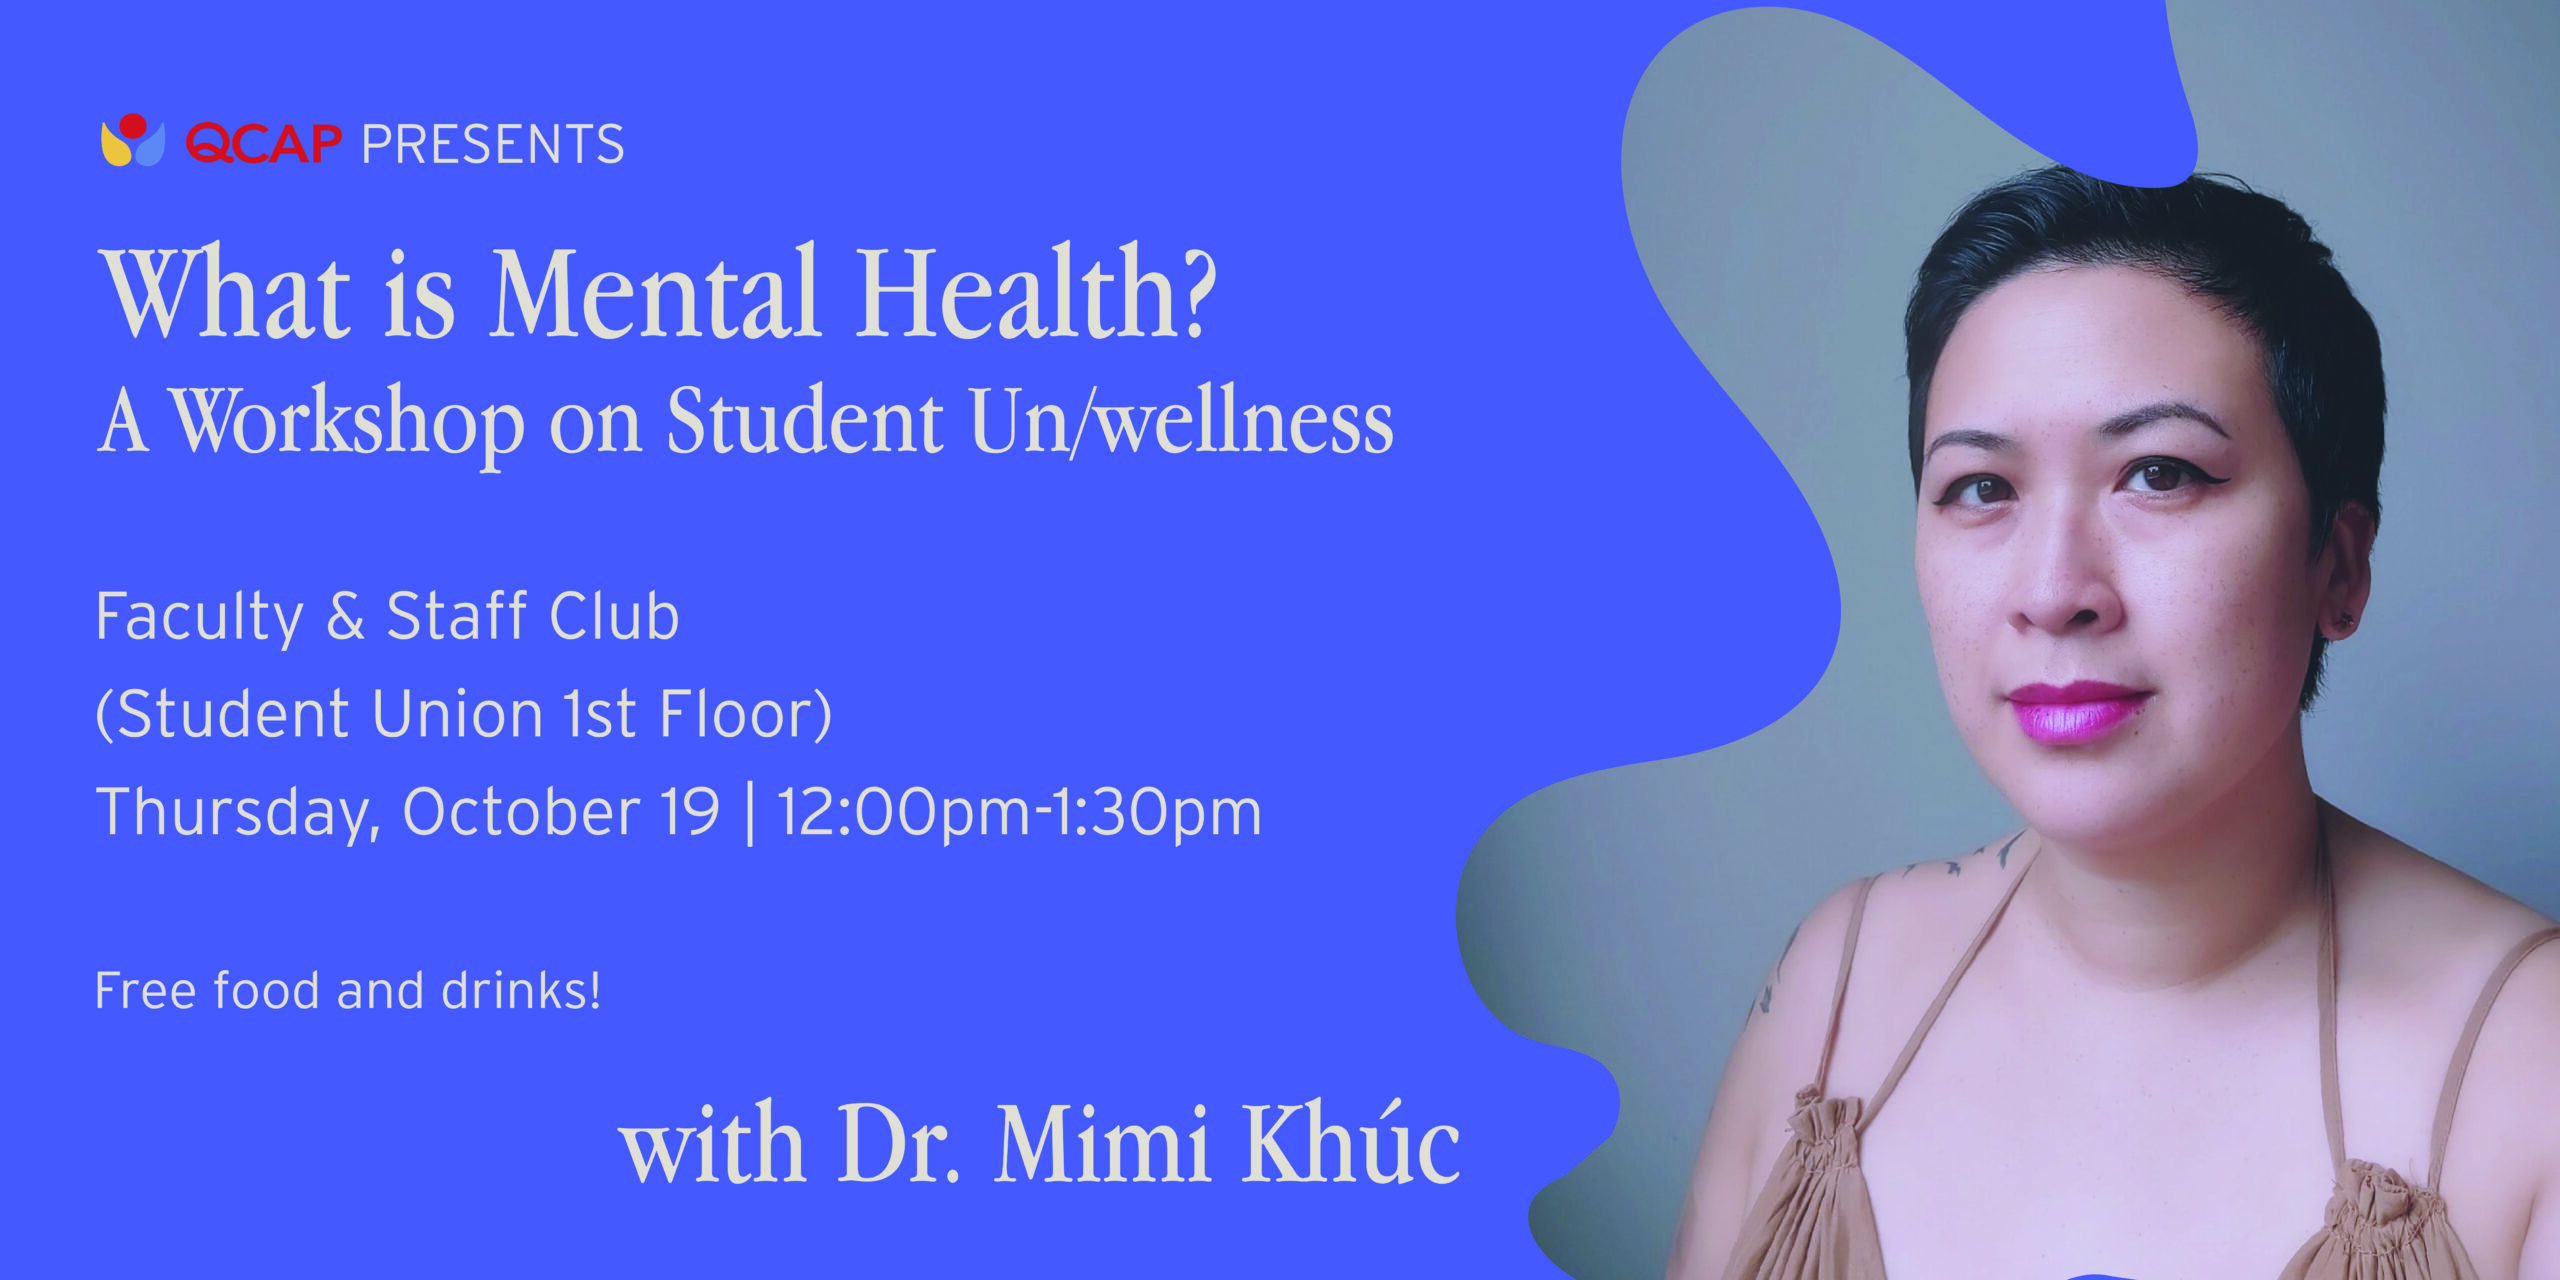 Dr. Mimi Khuc is on the right side of a purple-themed flyer, with information on an upcoming mental health workshop presented by QCAP. The text reads: QCAP presents What is Mental Health? A Workshop on Student Un/wellness, Oct. 19 at 12PM.